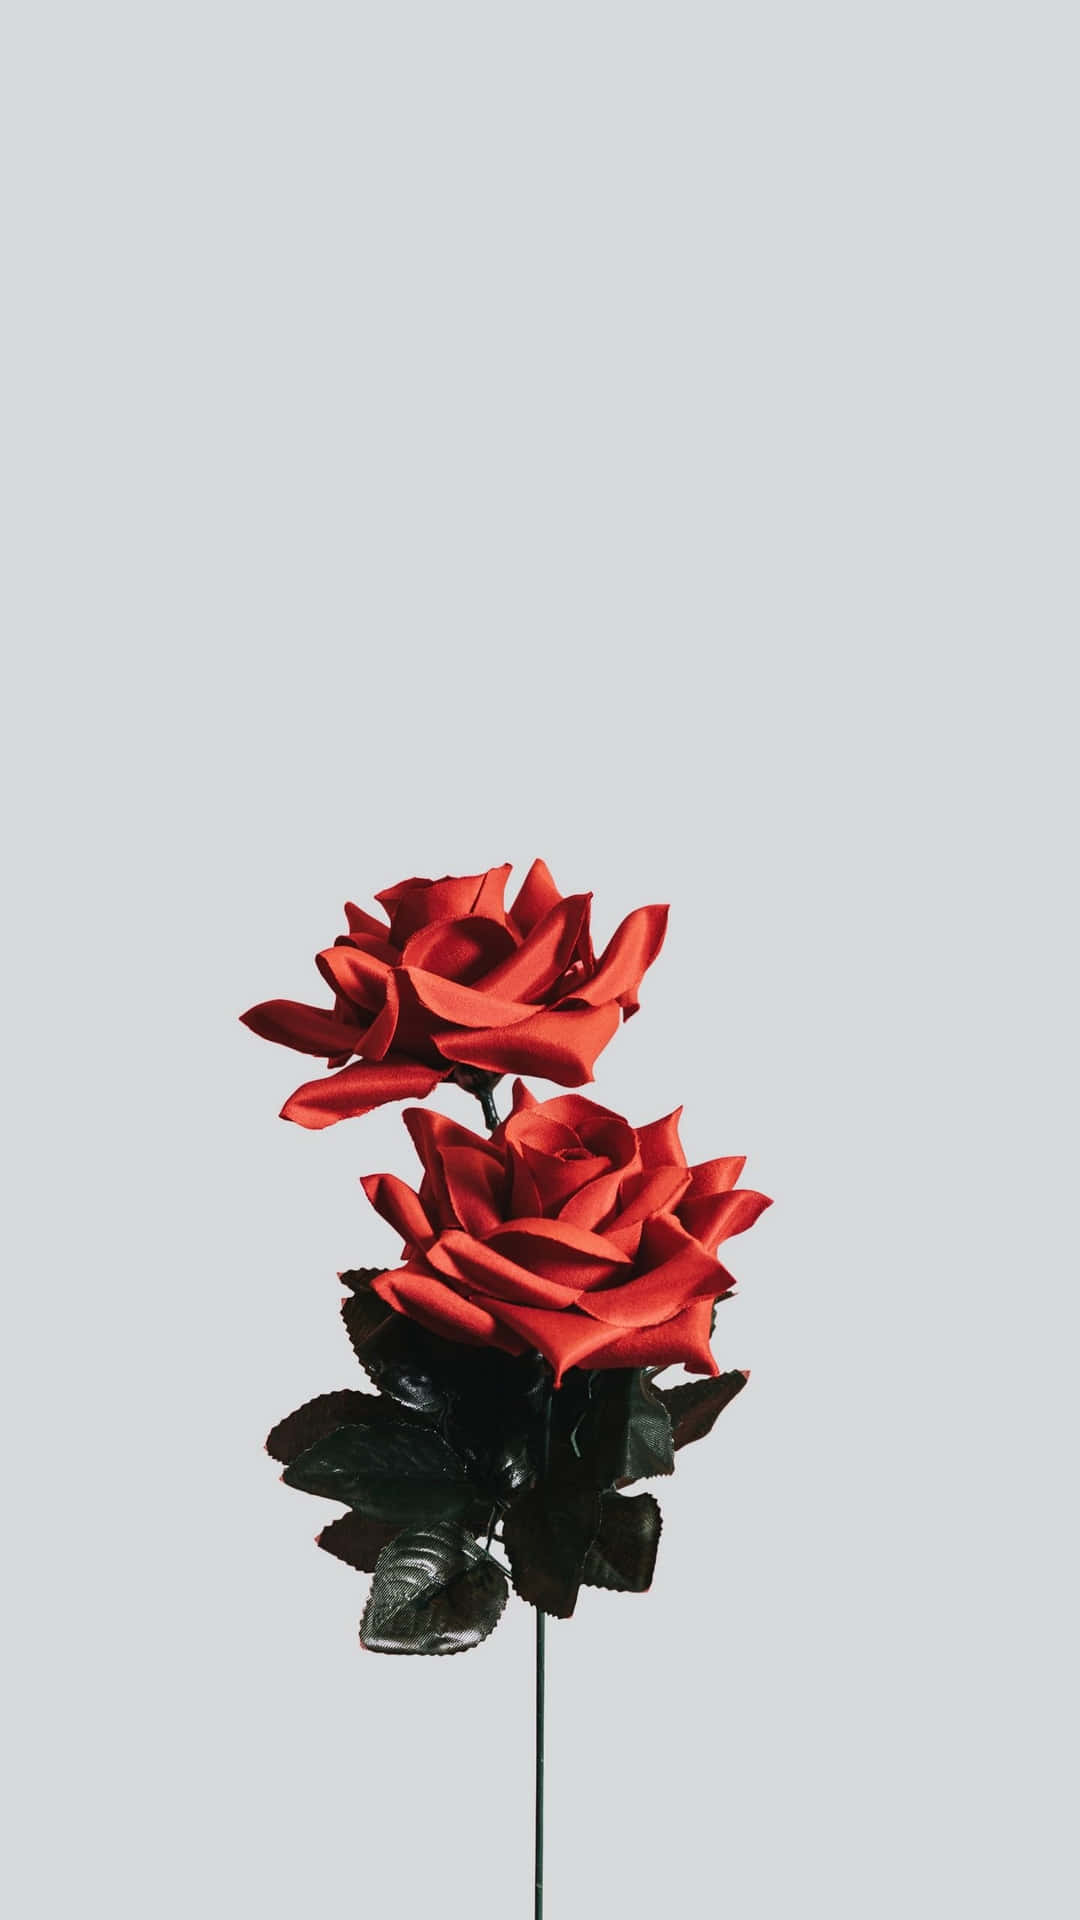 Minimalist Flower - A simple and serene sight Wallpaper